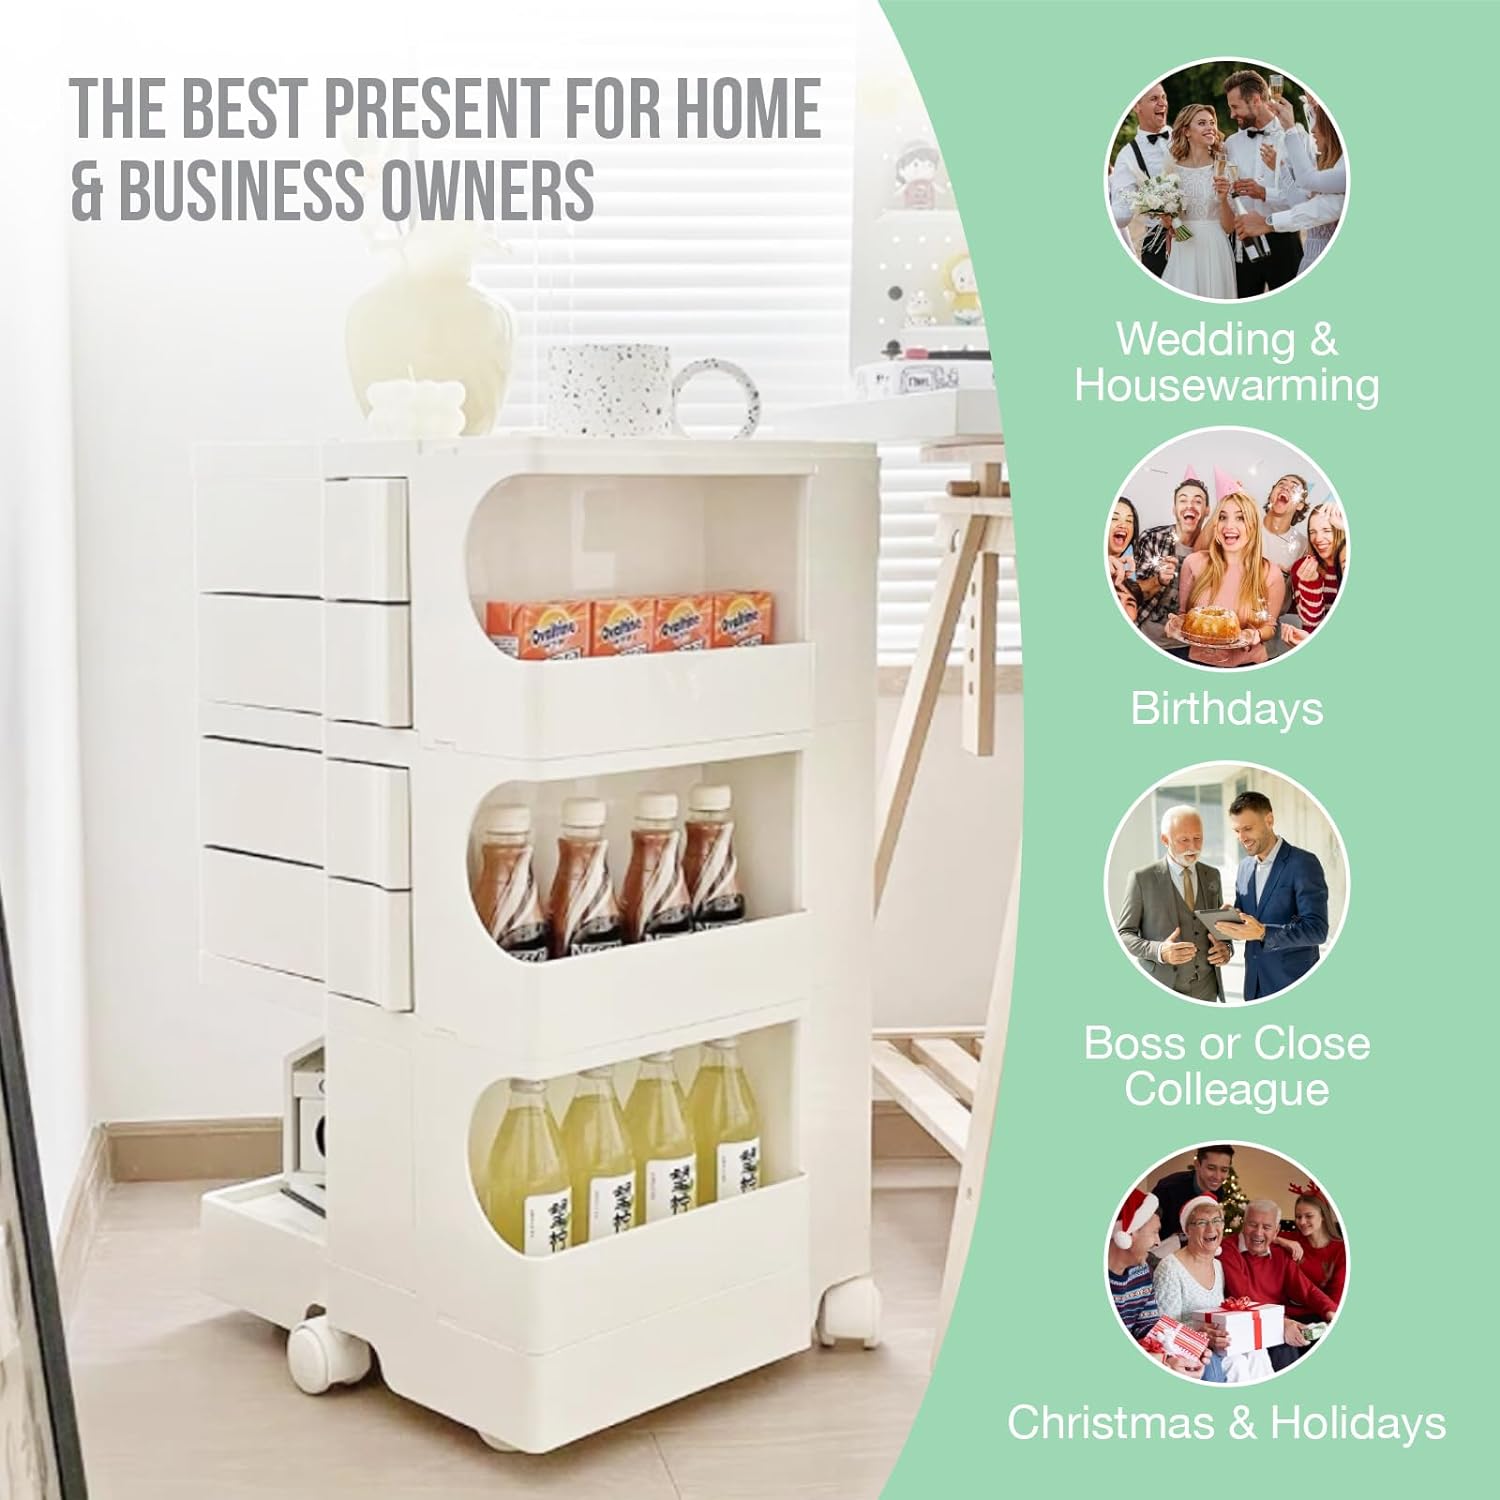 Load image into Gallery viewer, Multipurpose Utility Storage Cart - ABS Plastic Storage Caddy with Wheels and Slide Out Drawers - Kitchen Needs, Medical Tools - Cream Colour